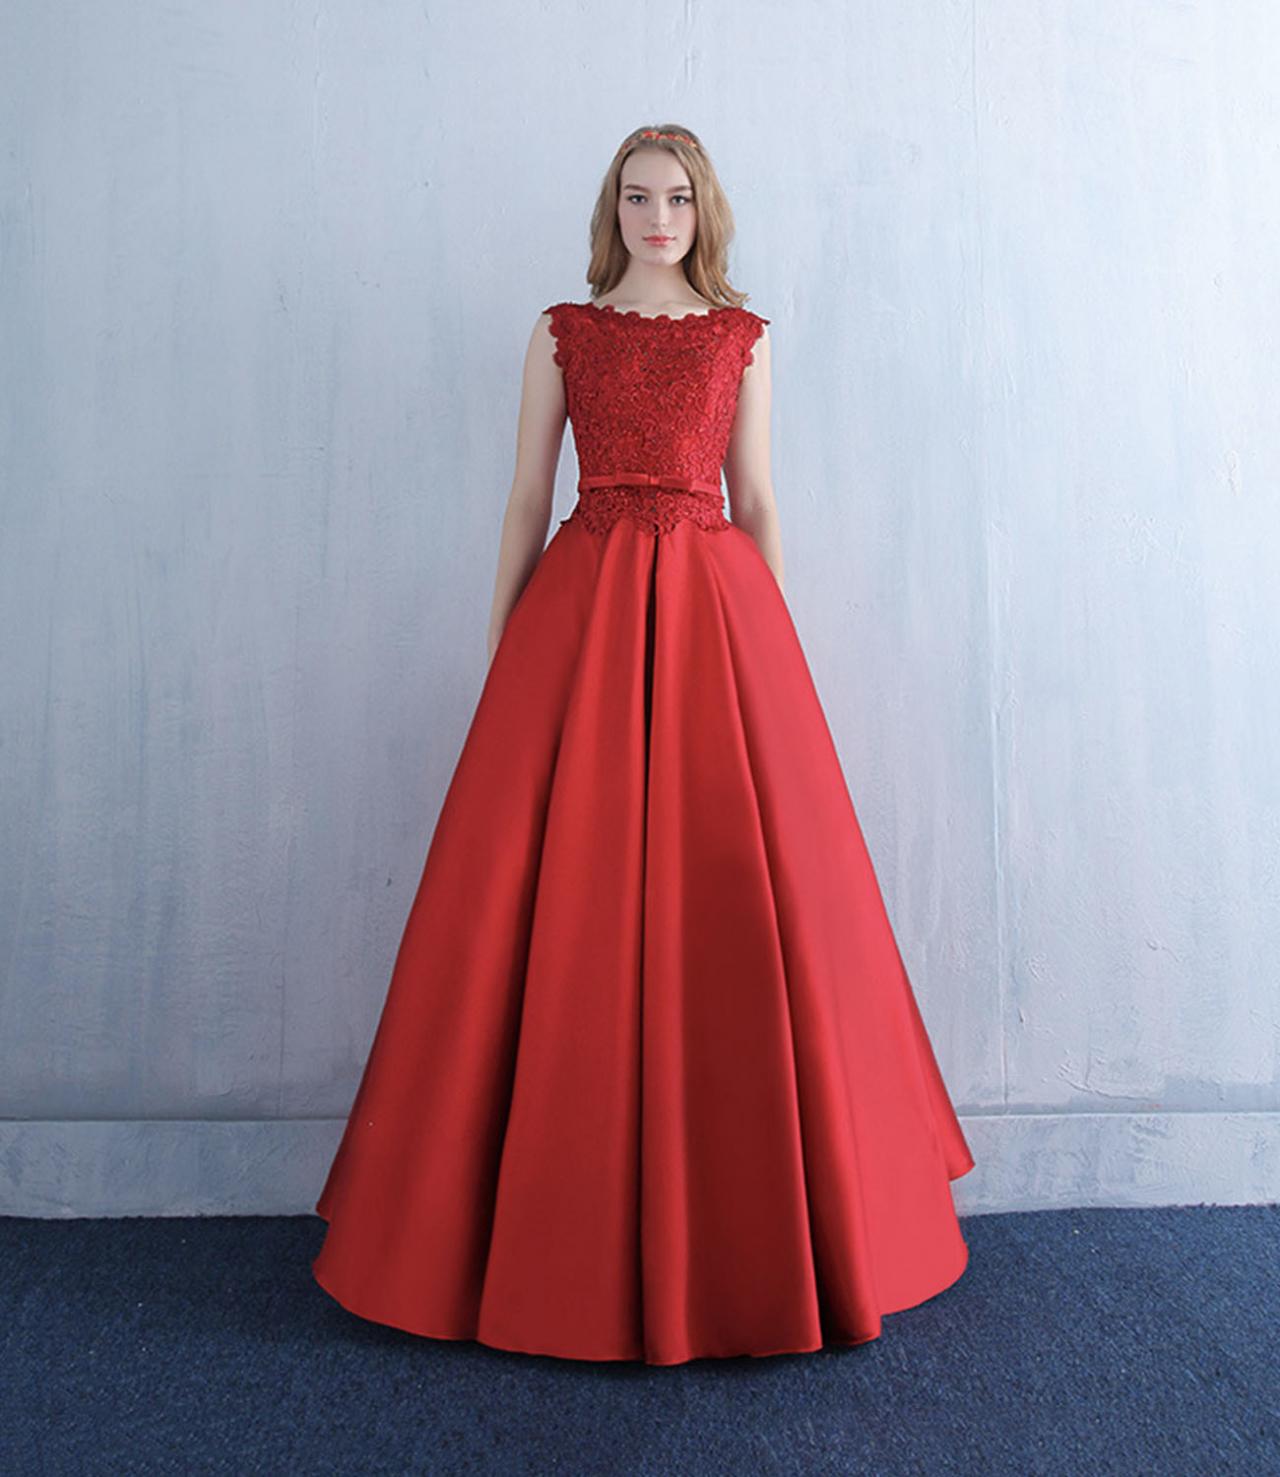 Red Satin Lace Long Prom Dress A Line Evening Gown